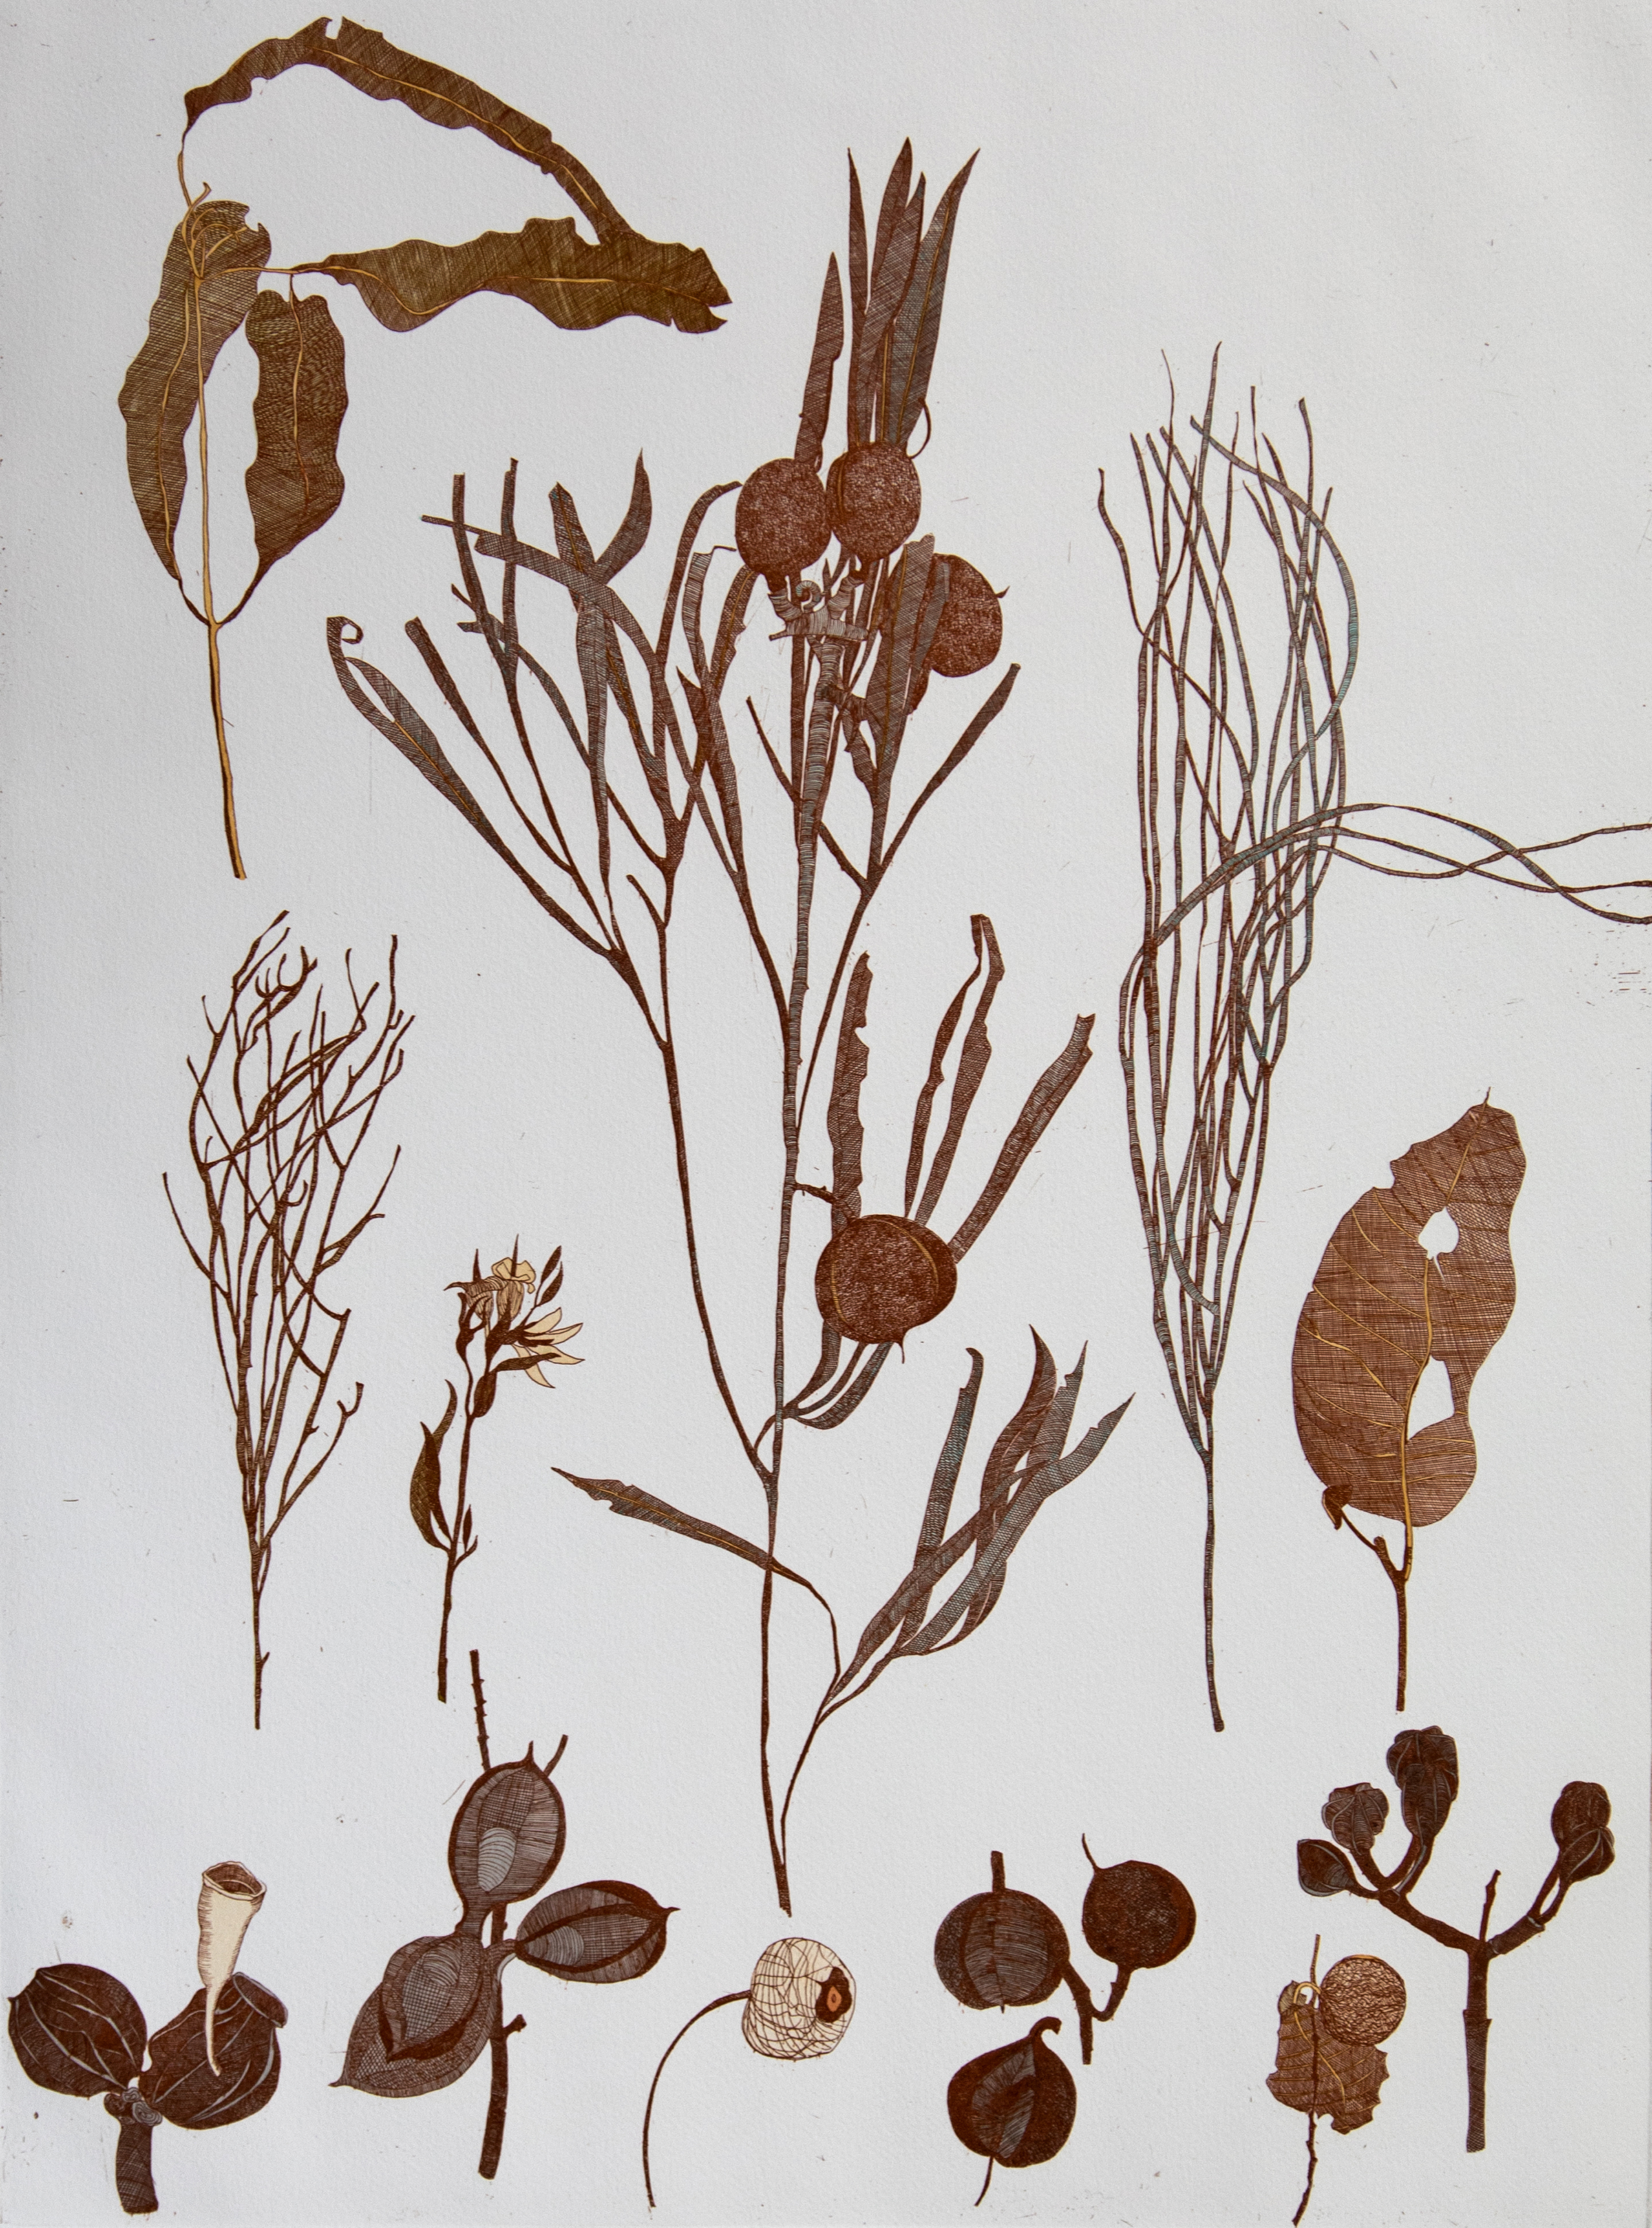 Collected specimens, Kimberley Region_etching, edition of 15_60 x 45cm